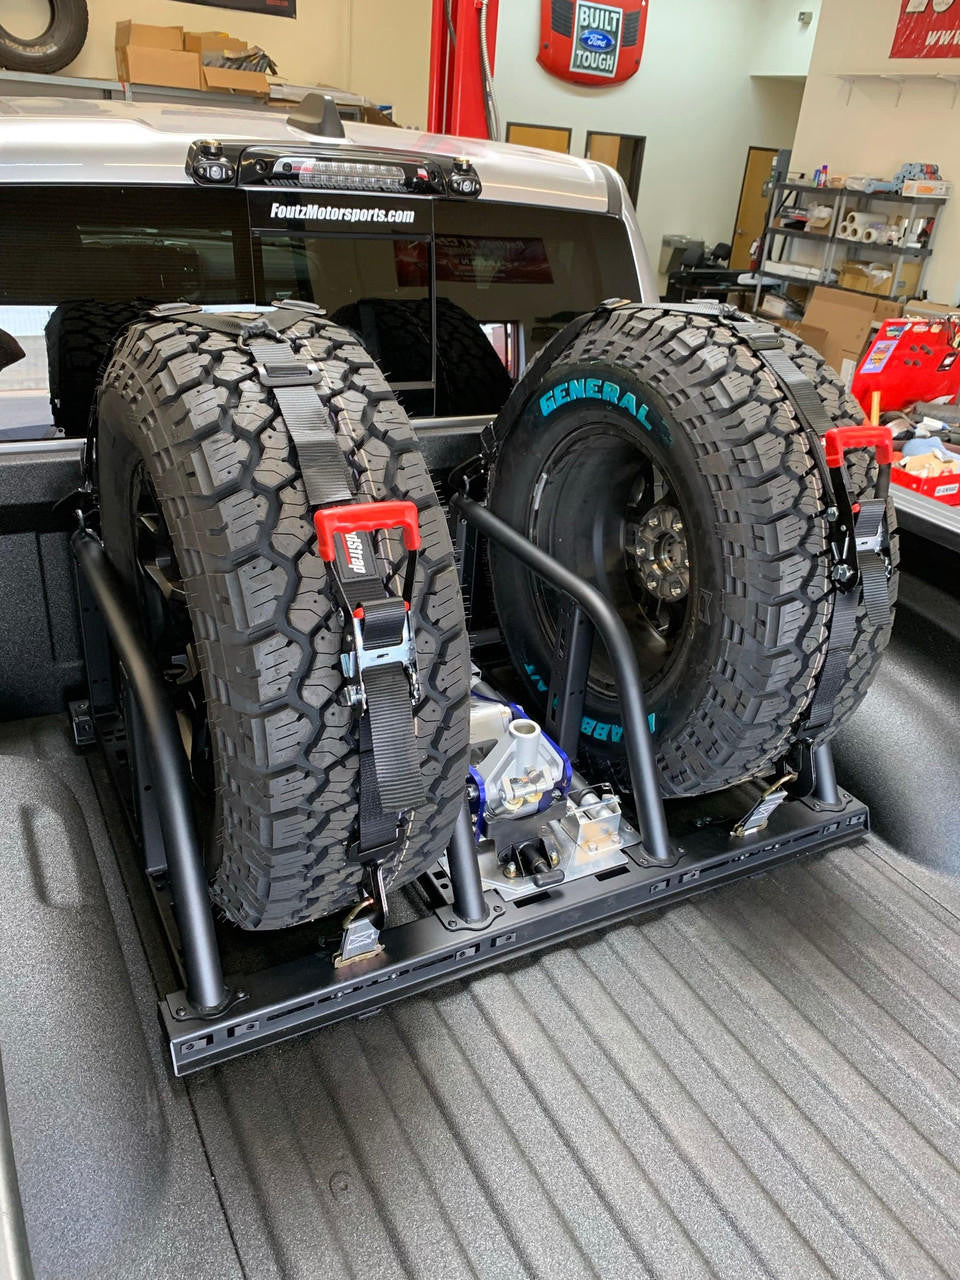 Foutz Motorsports Any Vehicle Quick Release Bed Organizer for Dual Tire - Universal Mount - Hammer Black FMI0699960003NA01 